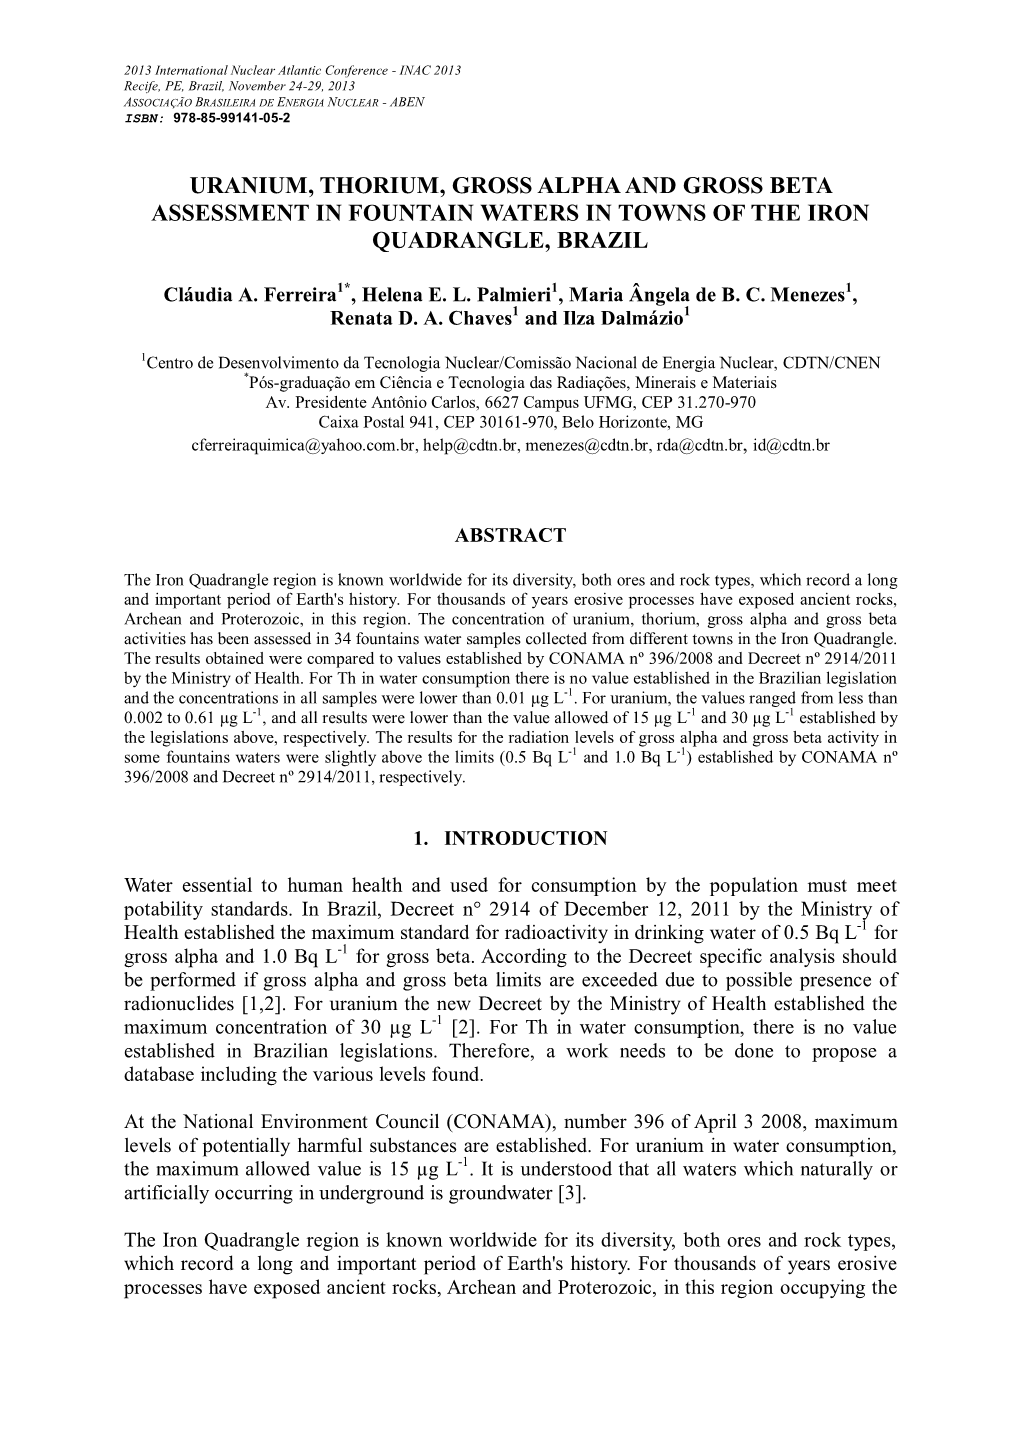 Uranium, Thorium, Gross Alpha and Gross Beta Assessment in Fountain Waters in Towns of the Iron Quadrangle, Brazil